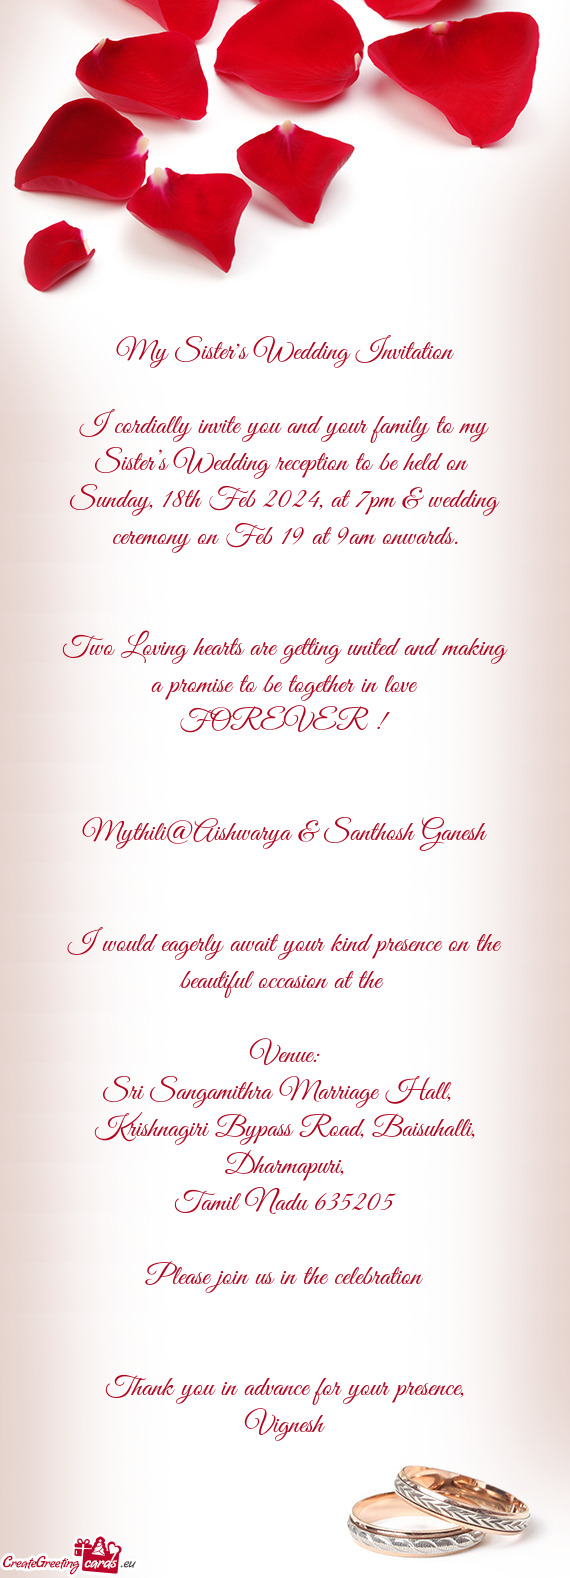 Sunday, 18th Feb 2024, at 7pm & wedding ceremony on Feb 19 at 9am onwards